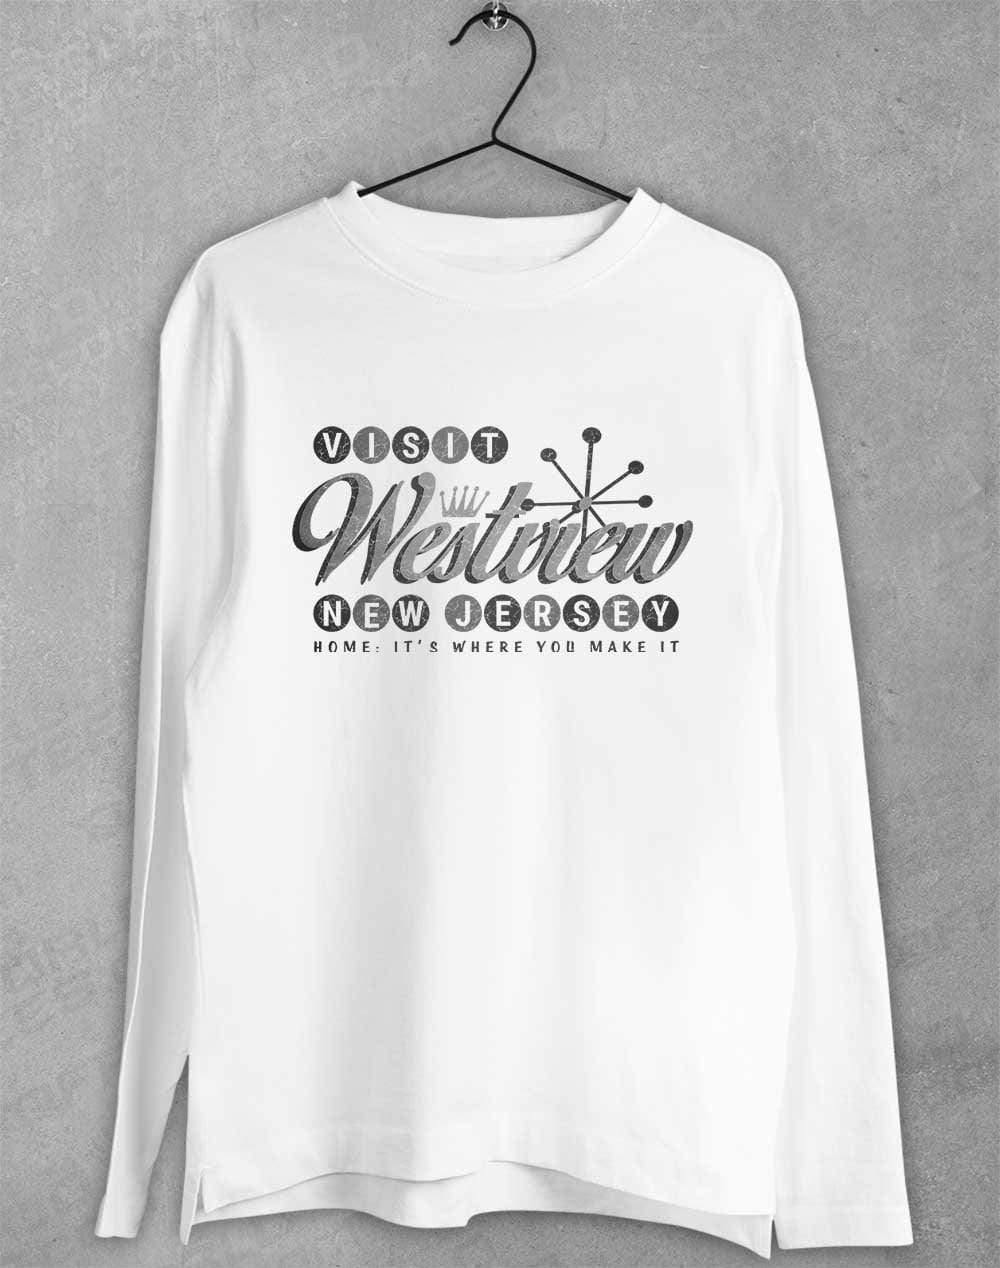 Visit Westview New Jersey Long Sleeve T-Shirt S / White  - Off World Tees